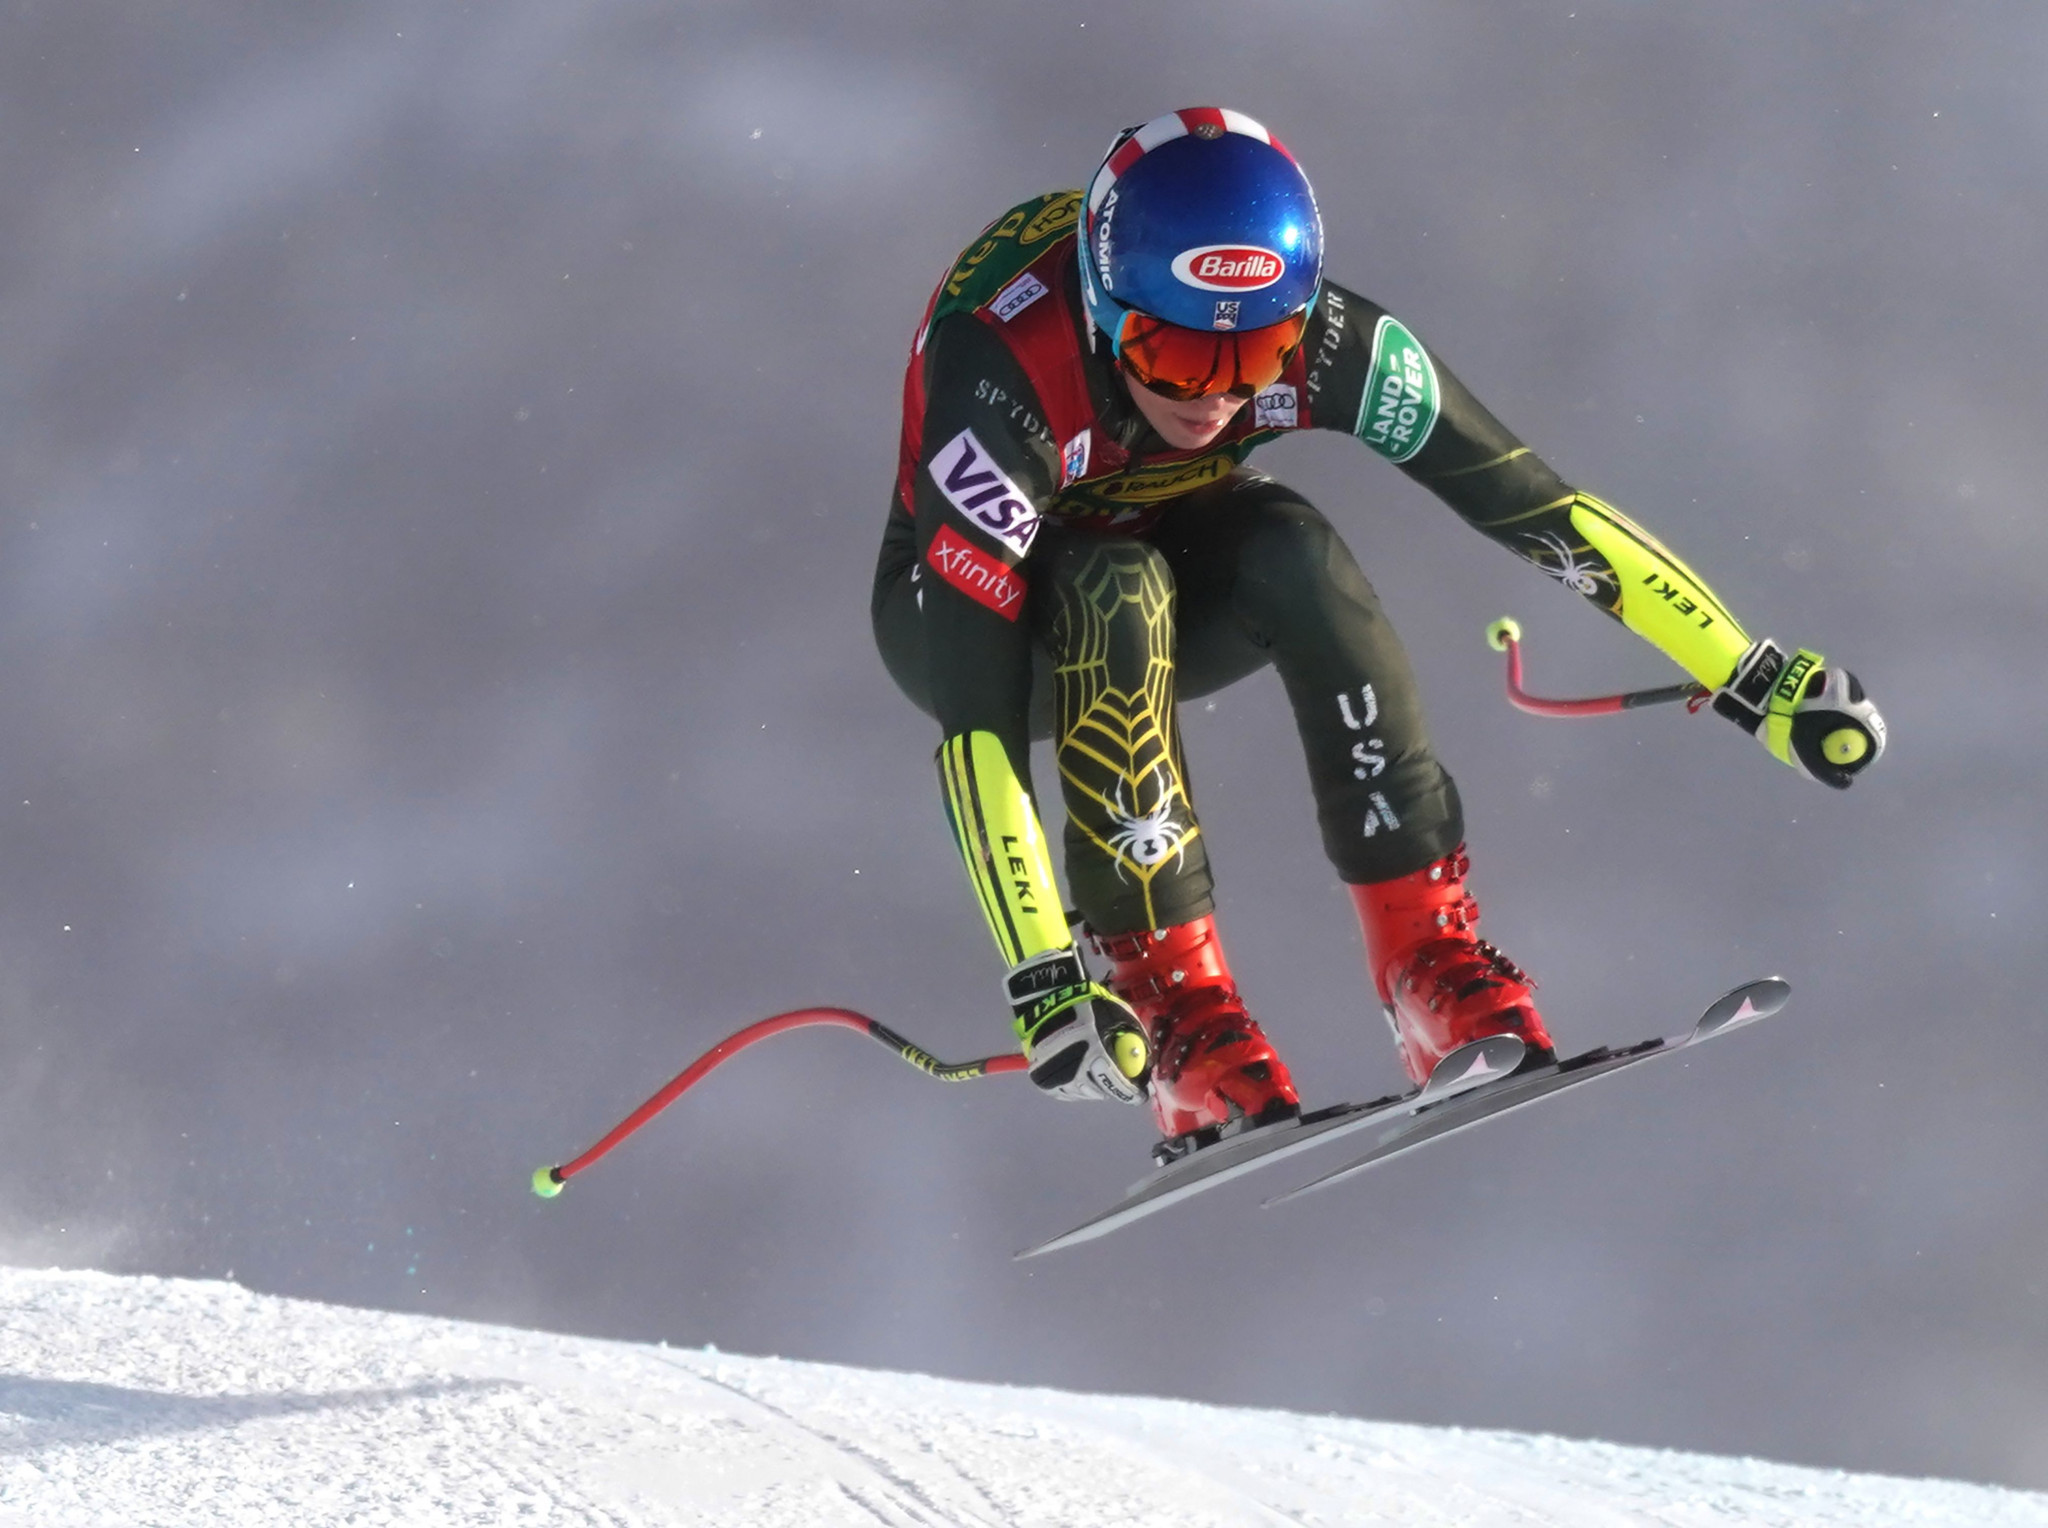 Alpine ski World Cup leader Mikaela Shiffrin of the US could only finish 10th ©Getty Images